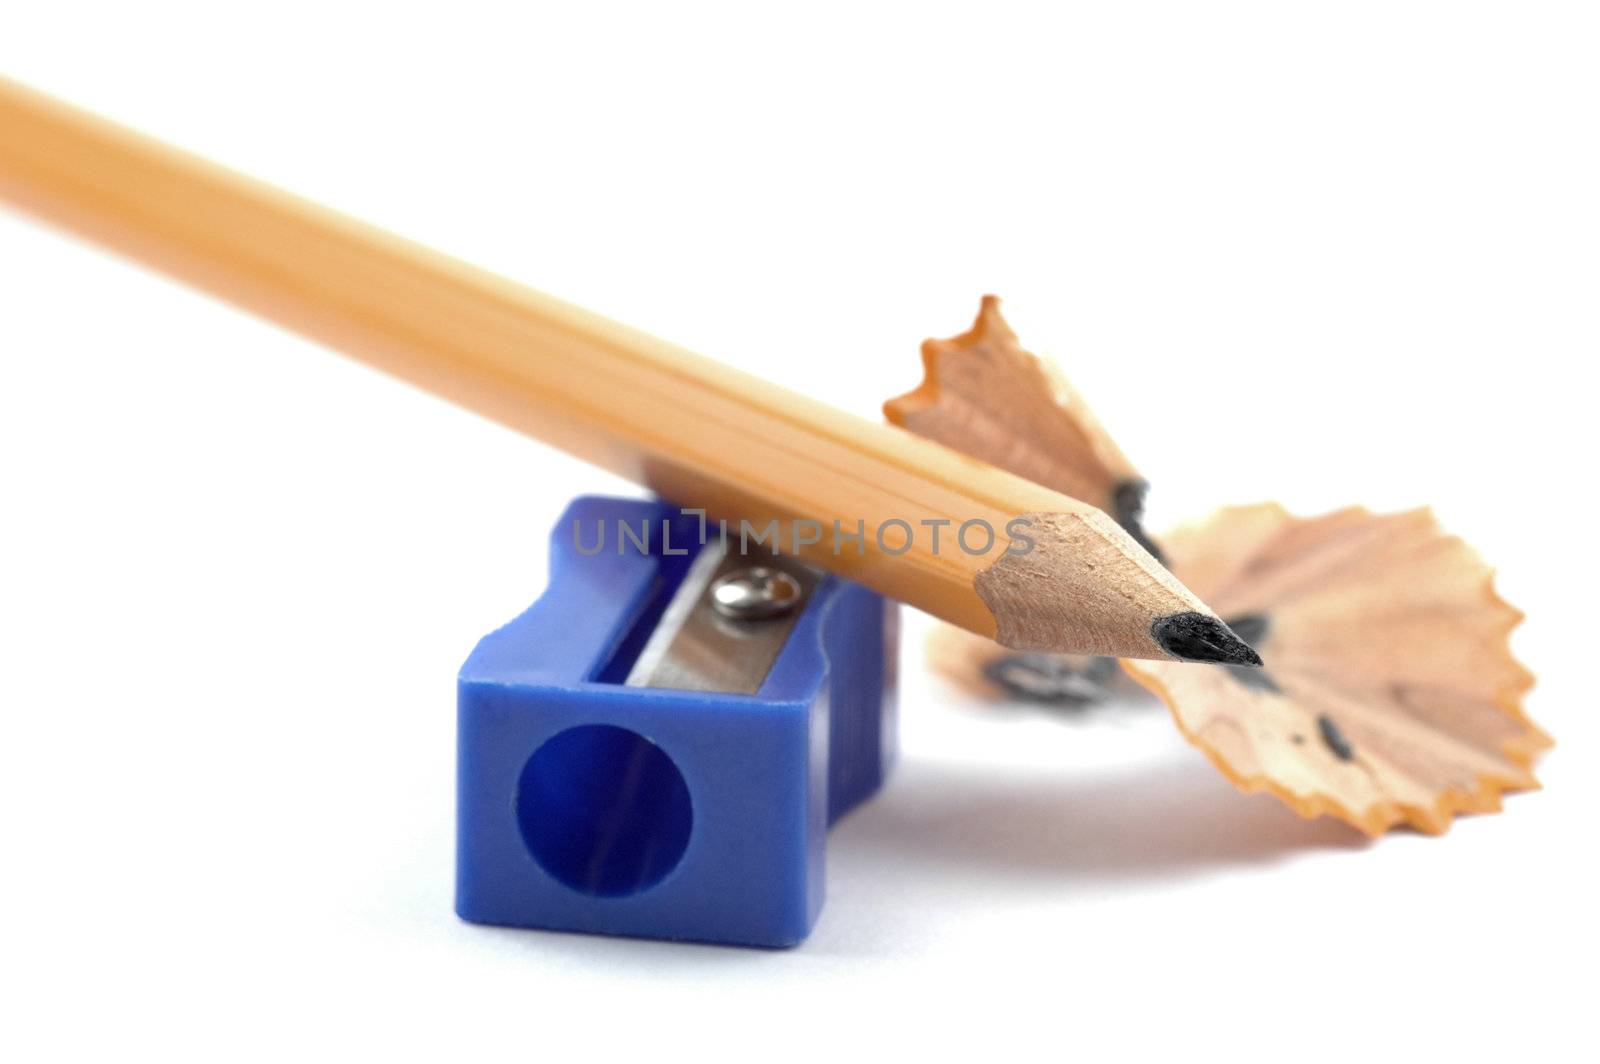 Close-up of a sharpened pencil and sharpener.